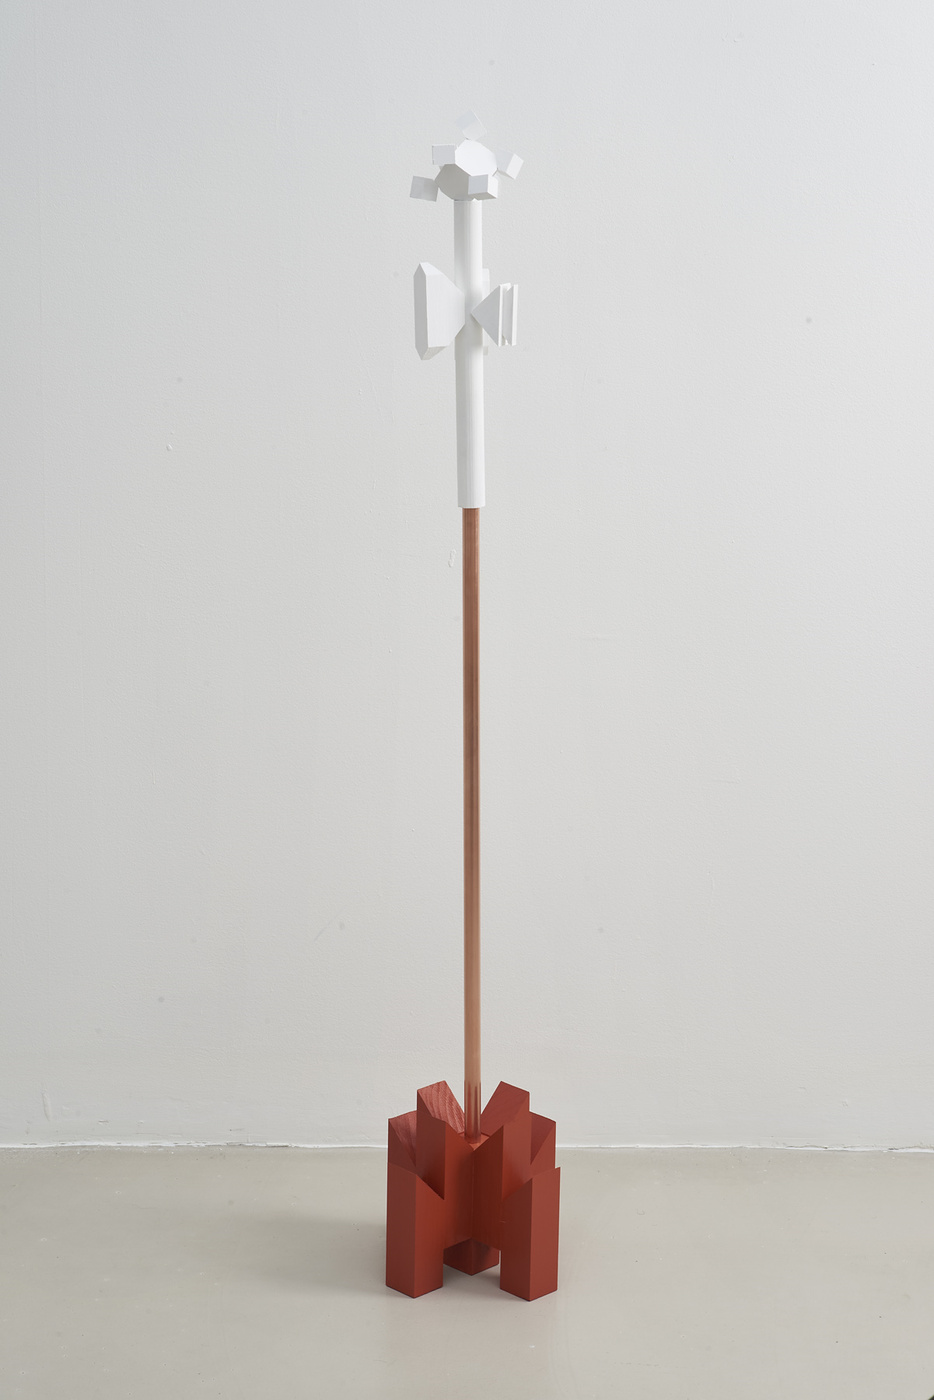 Sutter-Shudo_Pole for the Crib of the Infant Jesus, 2016_43 x 7.5x7.5 inches_NSS00005ST_PRS (1)